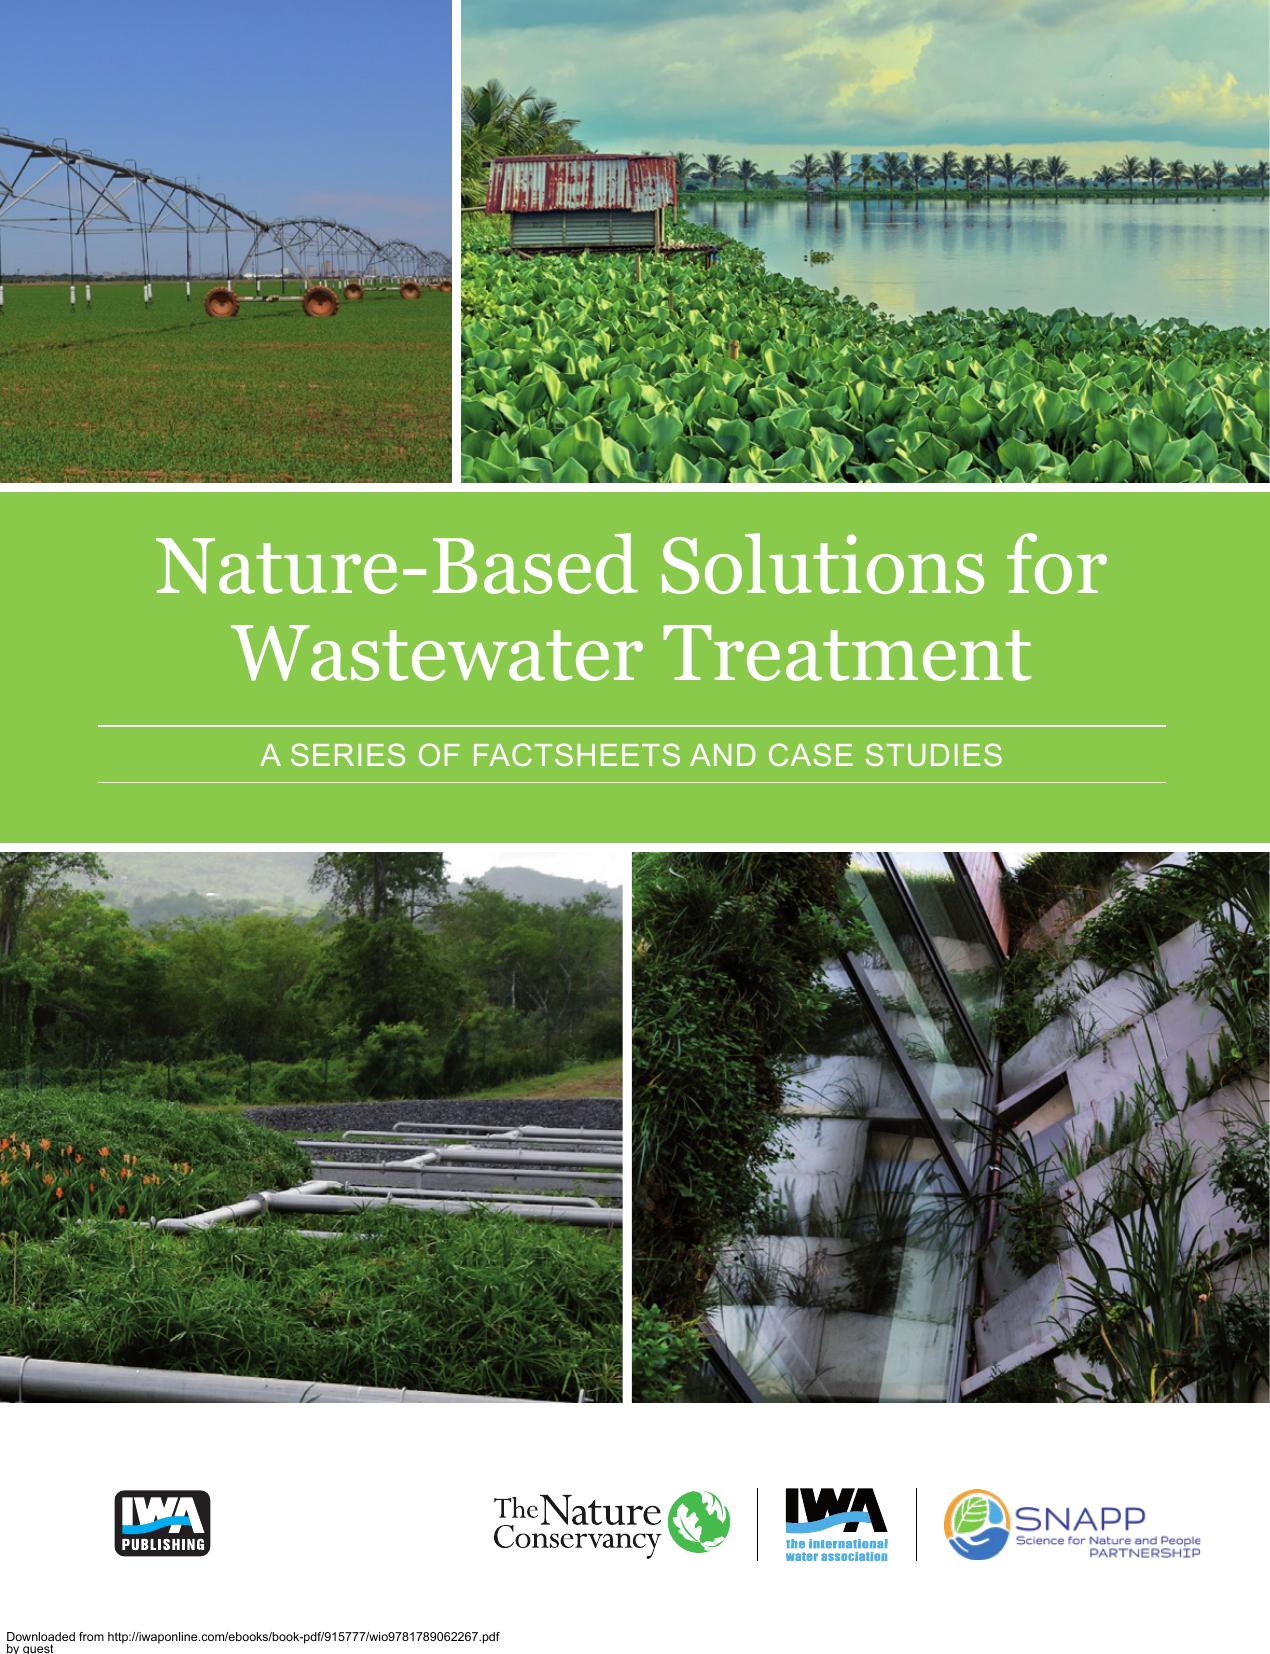 Nature-Based Solutions for Wastewater Treatment: A SERIES OF FACTSHEETS AND CASE STUDIES